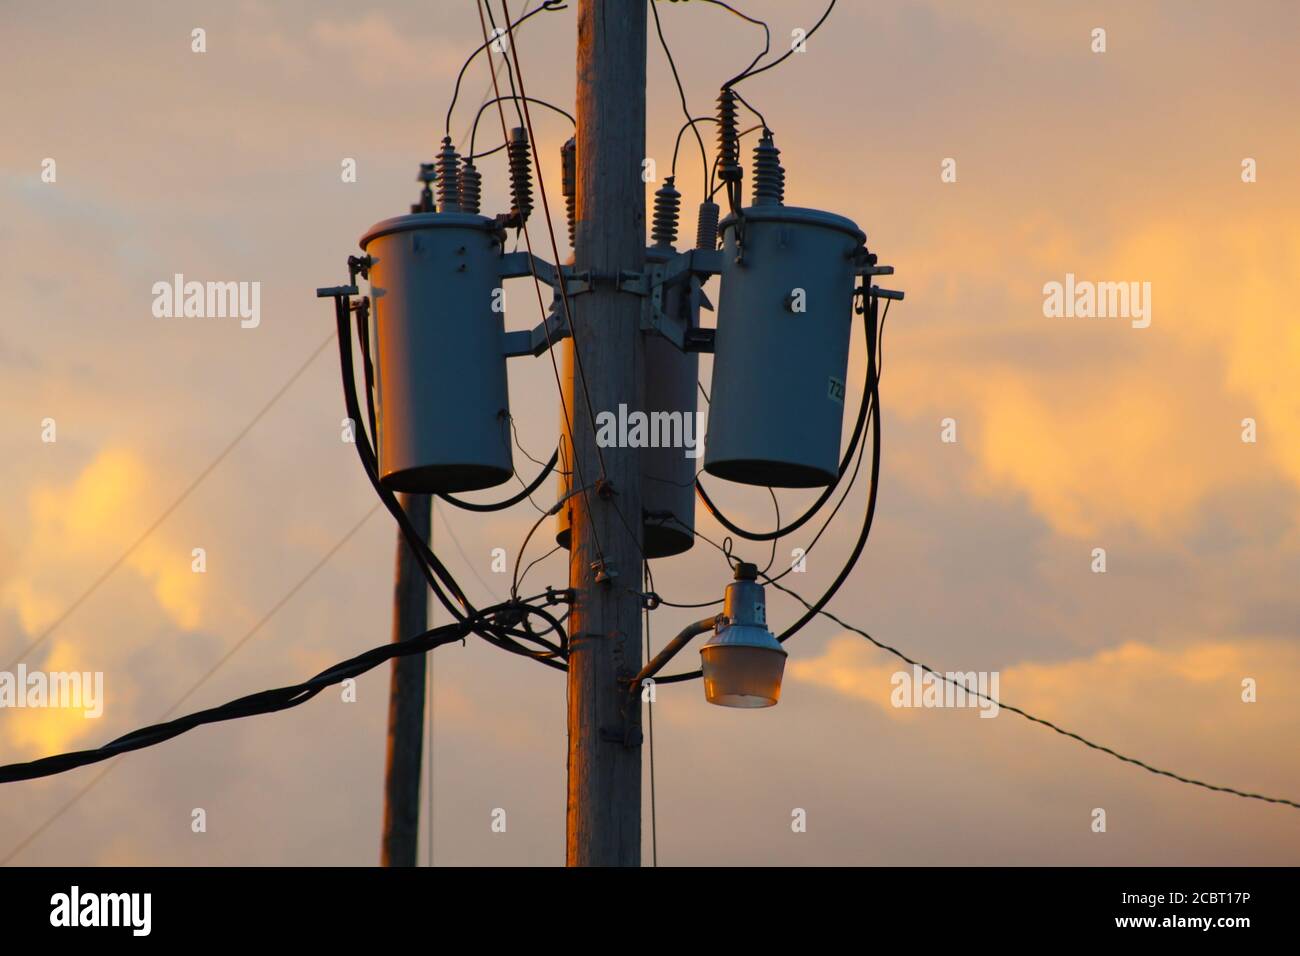 Telephone Pole With Light and Clouds in the Sky in the Ozarks, United States Stock Photo